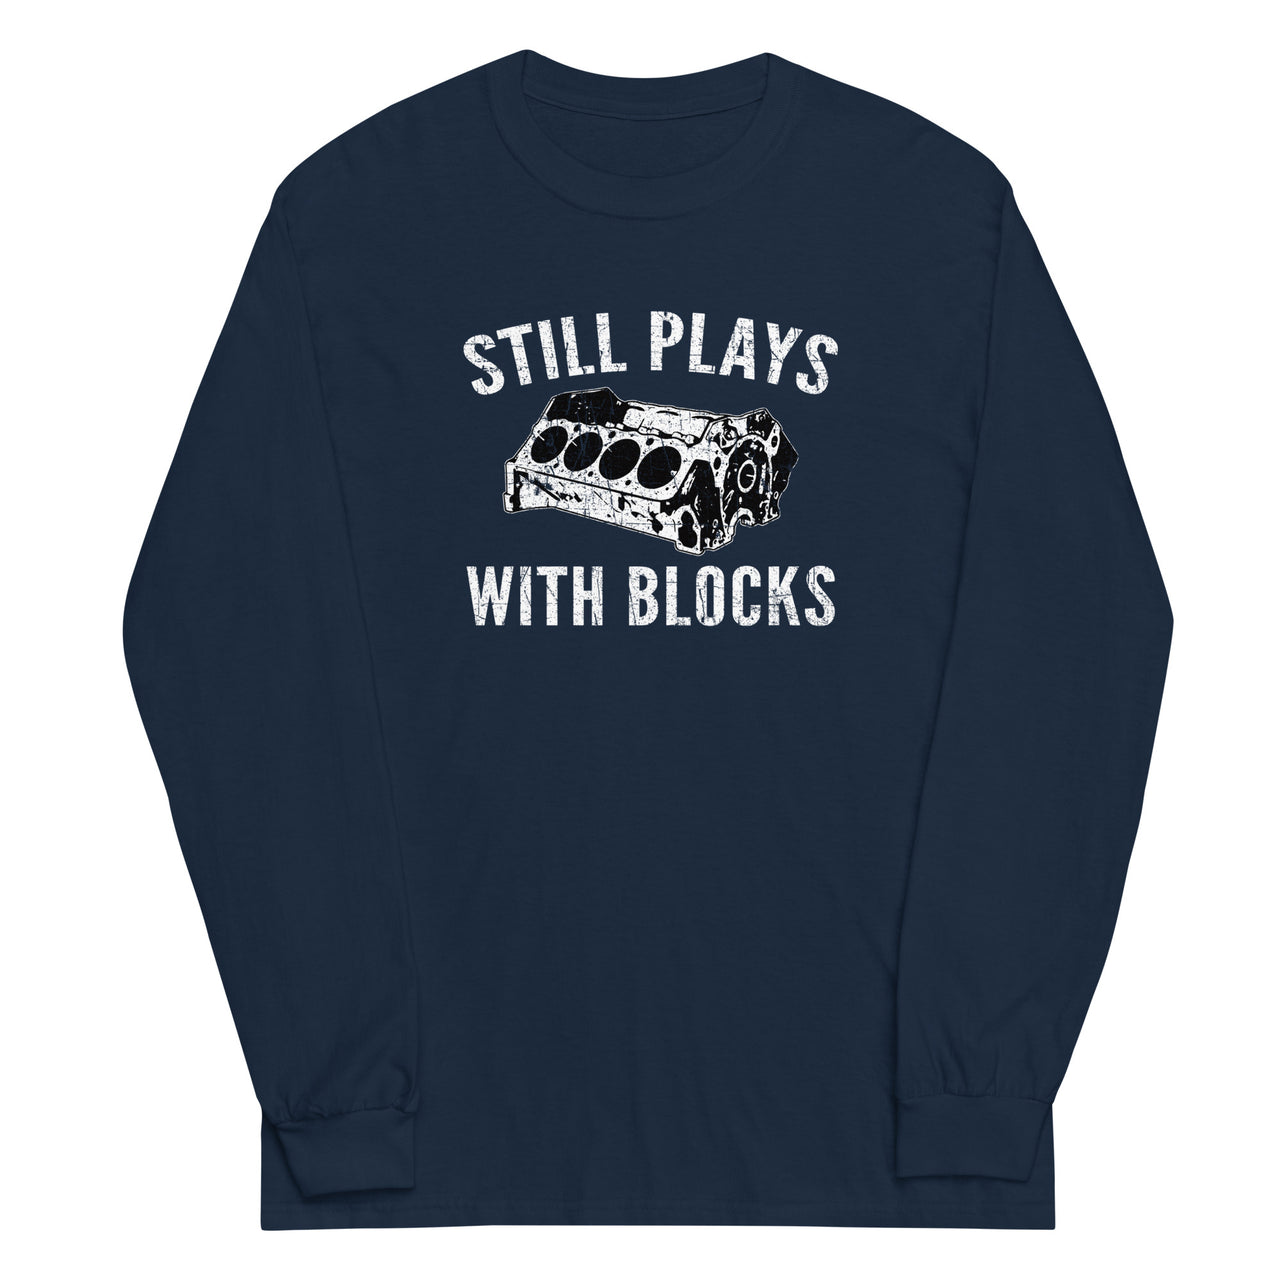 Still Plays With Blocks Car Enthusiasts Long Sleeve Shirt in navy